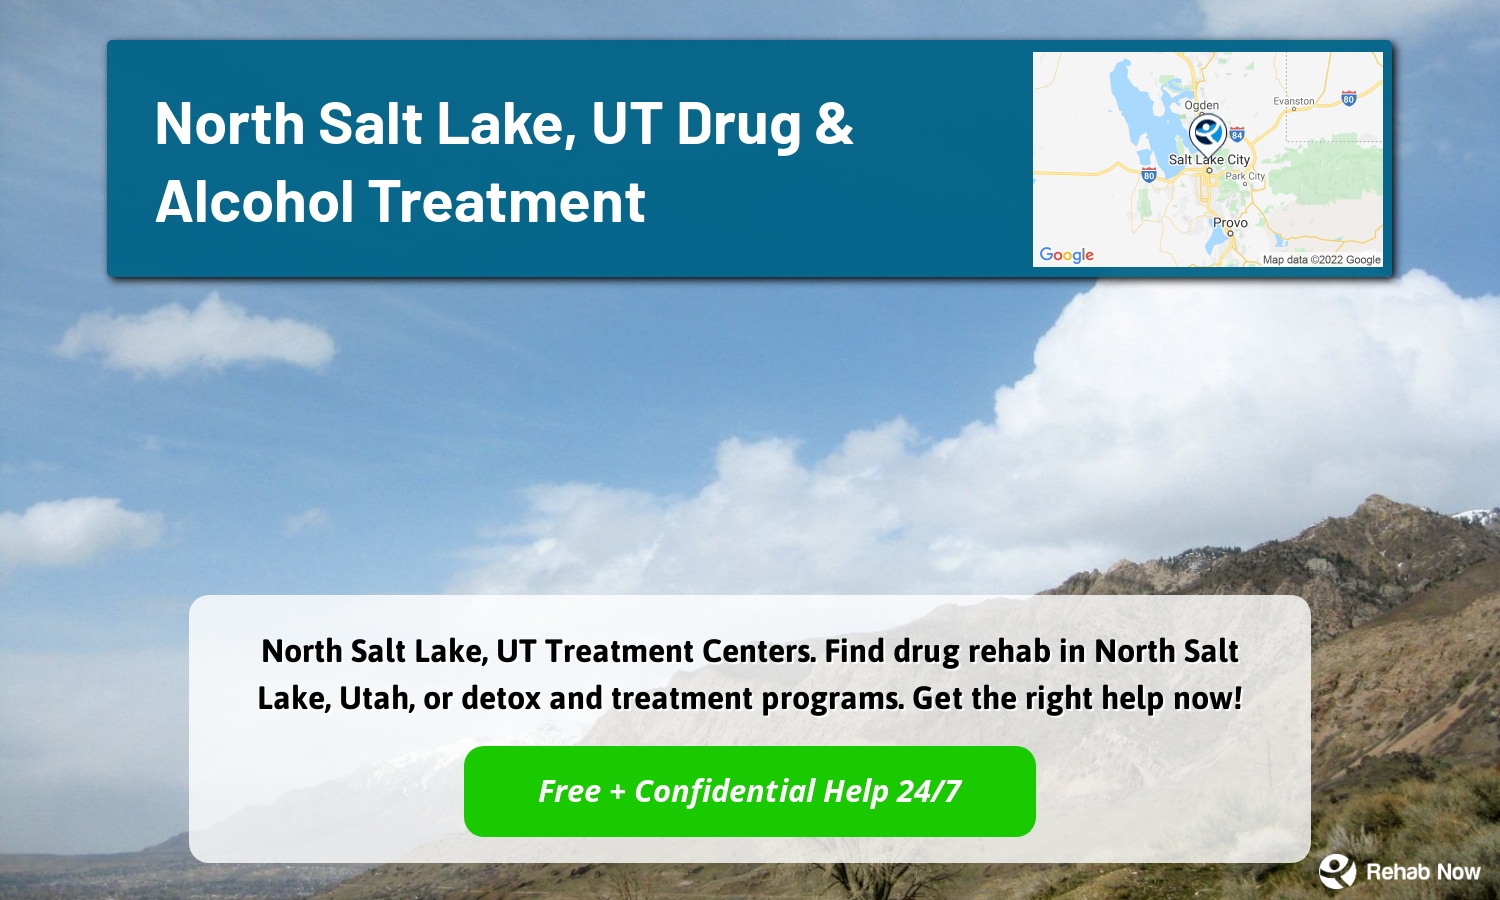 North Salt Lake, UT Treatment Centers. Find drug rehab in North Salt Lake, Utah, or detox and treatment programs. Get the right help now!